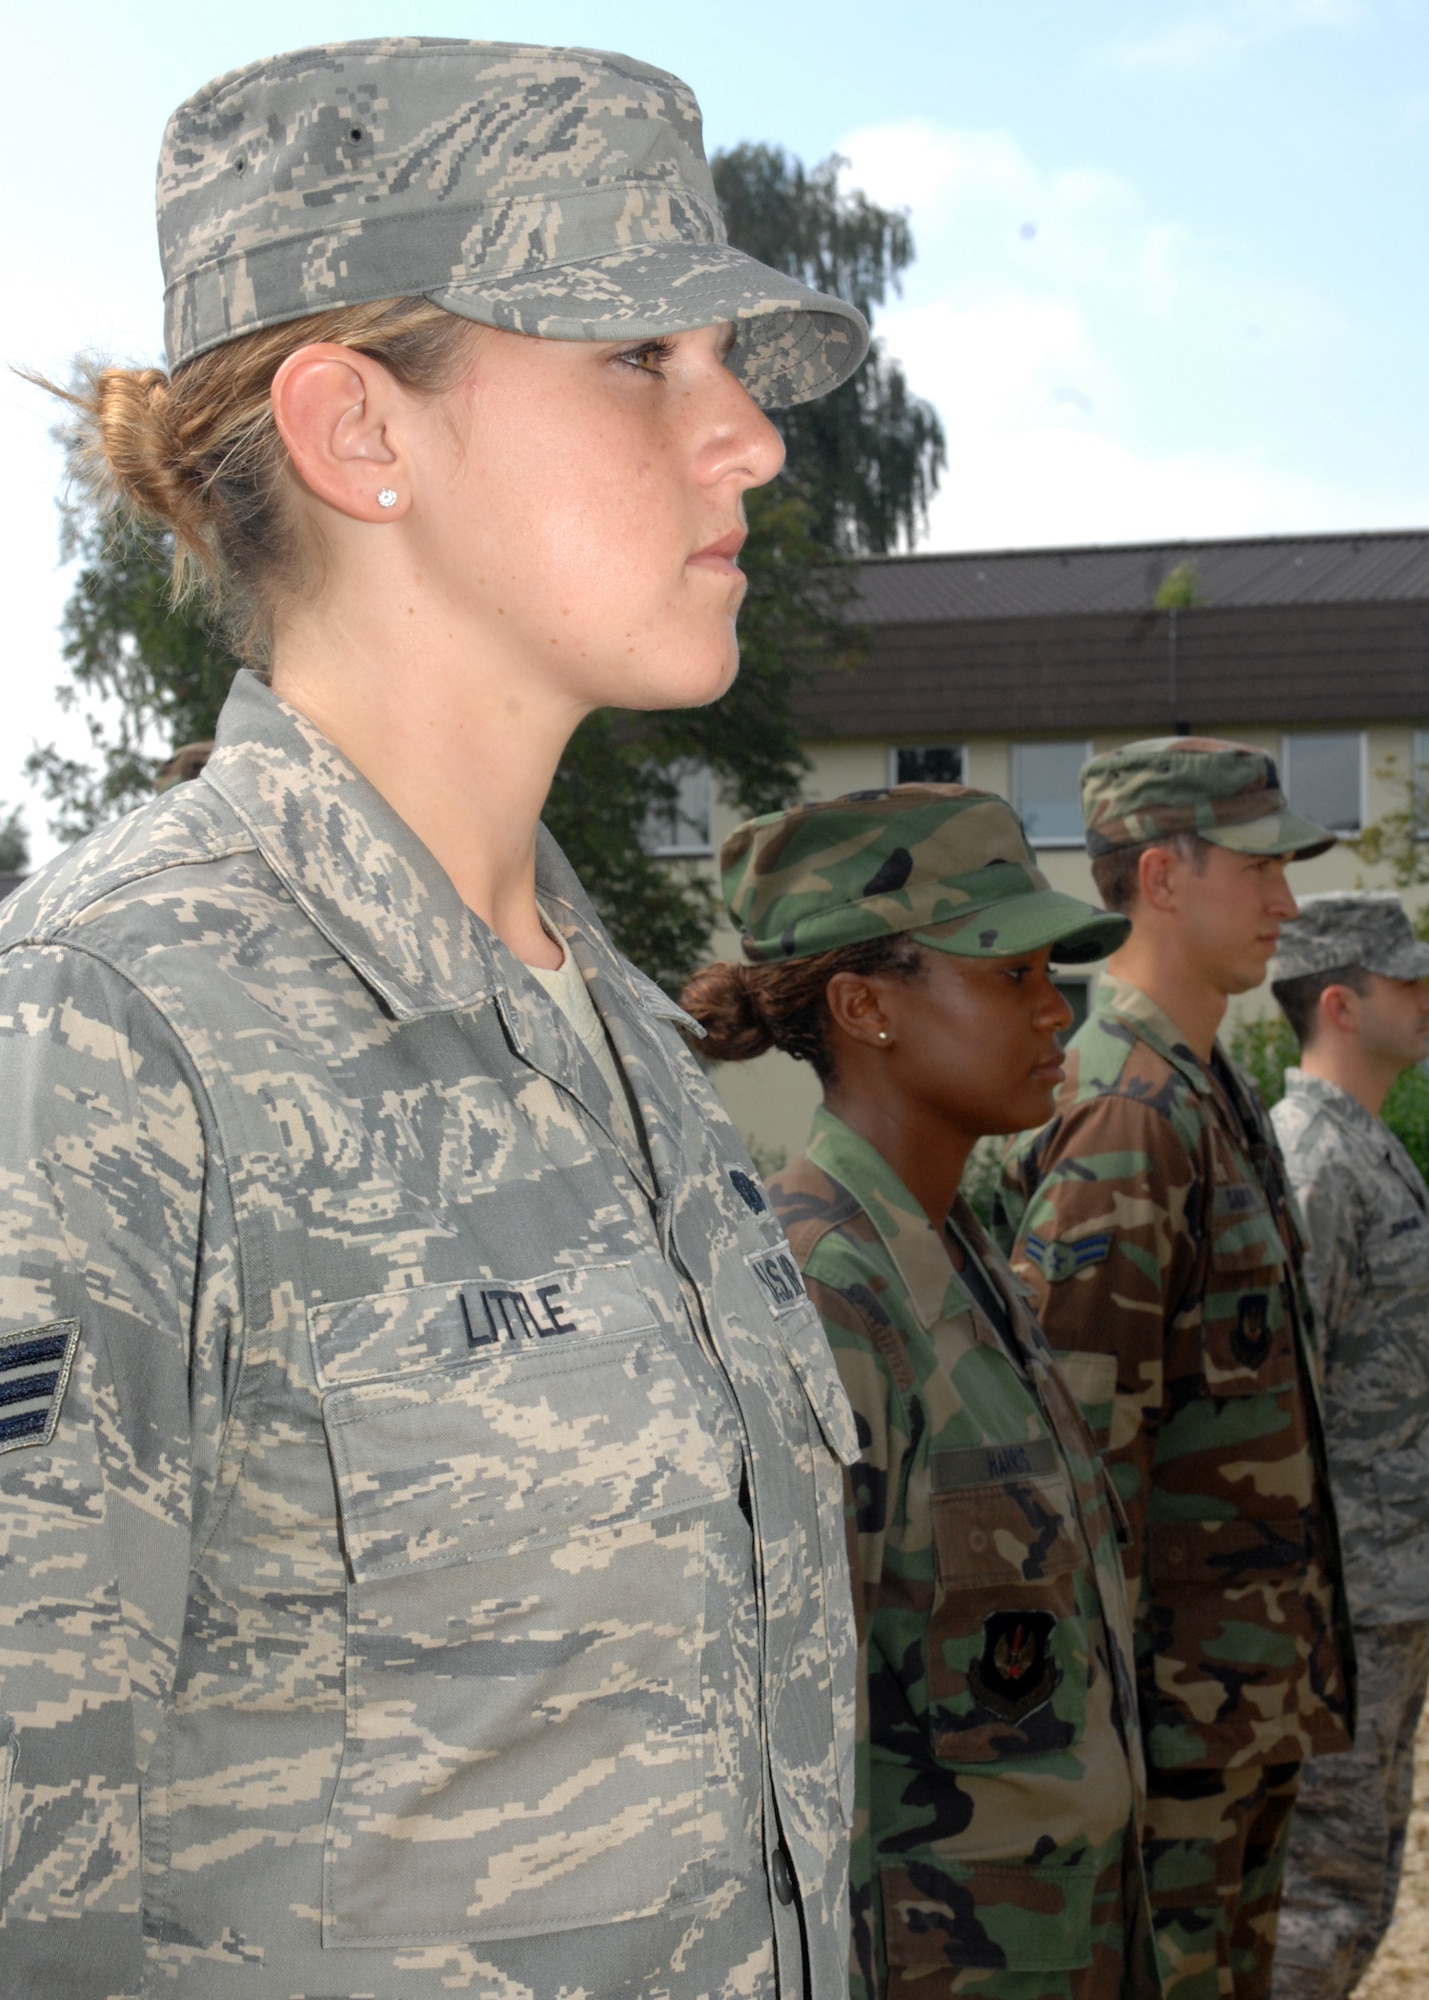 SPANGDAHLEM AIR BASE, Germany – (Left to right) Senior Airman Katherine Little, Senior Airman Tashanna Harris, Airman 1st Class Andrew Sanders, and Staff Sgt. Christopher Johnson, 52nd Fighter Wing Base Honor Guard members, stand at the position of attention August 27, 2008. (U.S. Air Force photo by Airman 1st Class Jenifer H. Calhoun)